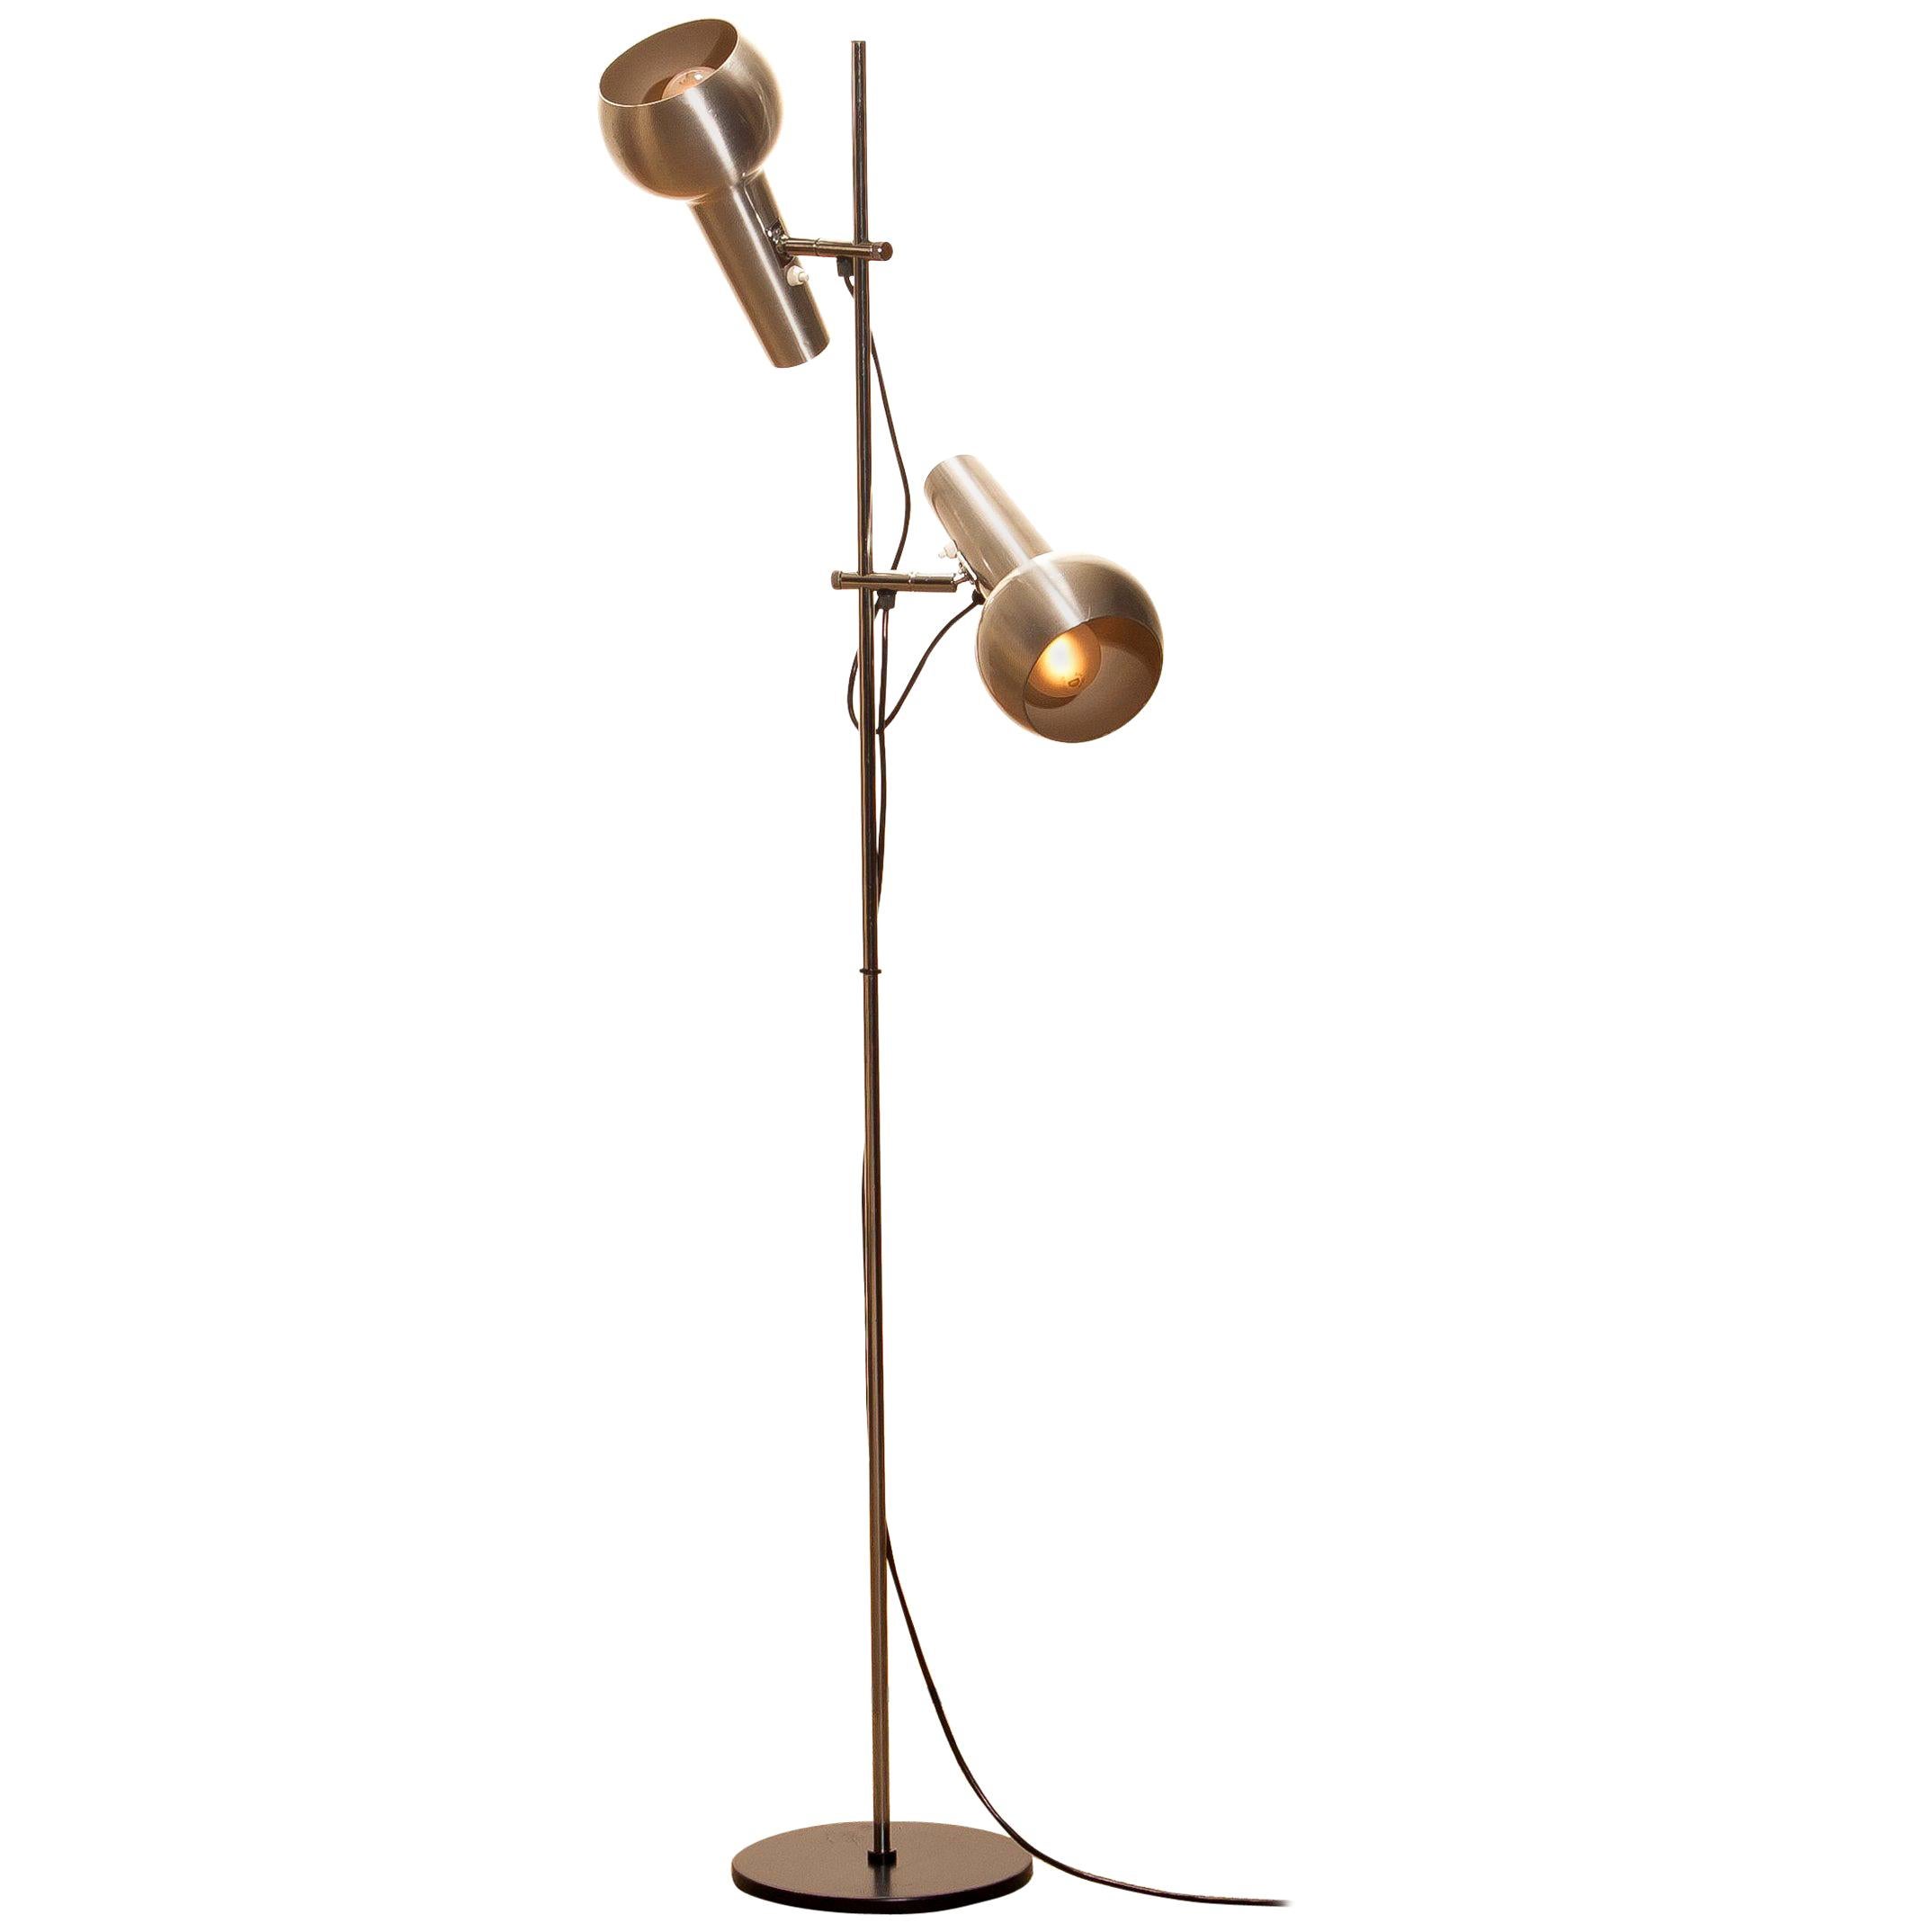 Typical 1970s floor lamp with two big adjustable heads in chrome and aluminium combination and made by Koch & Lowy, 1970s.
In good condition and technical 100%.
Both lamps or shades are with a switch provided.
Period: 1970s.
The dimensions are